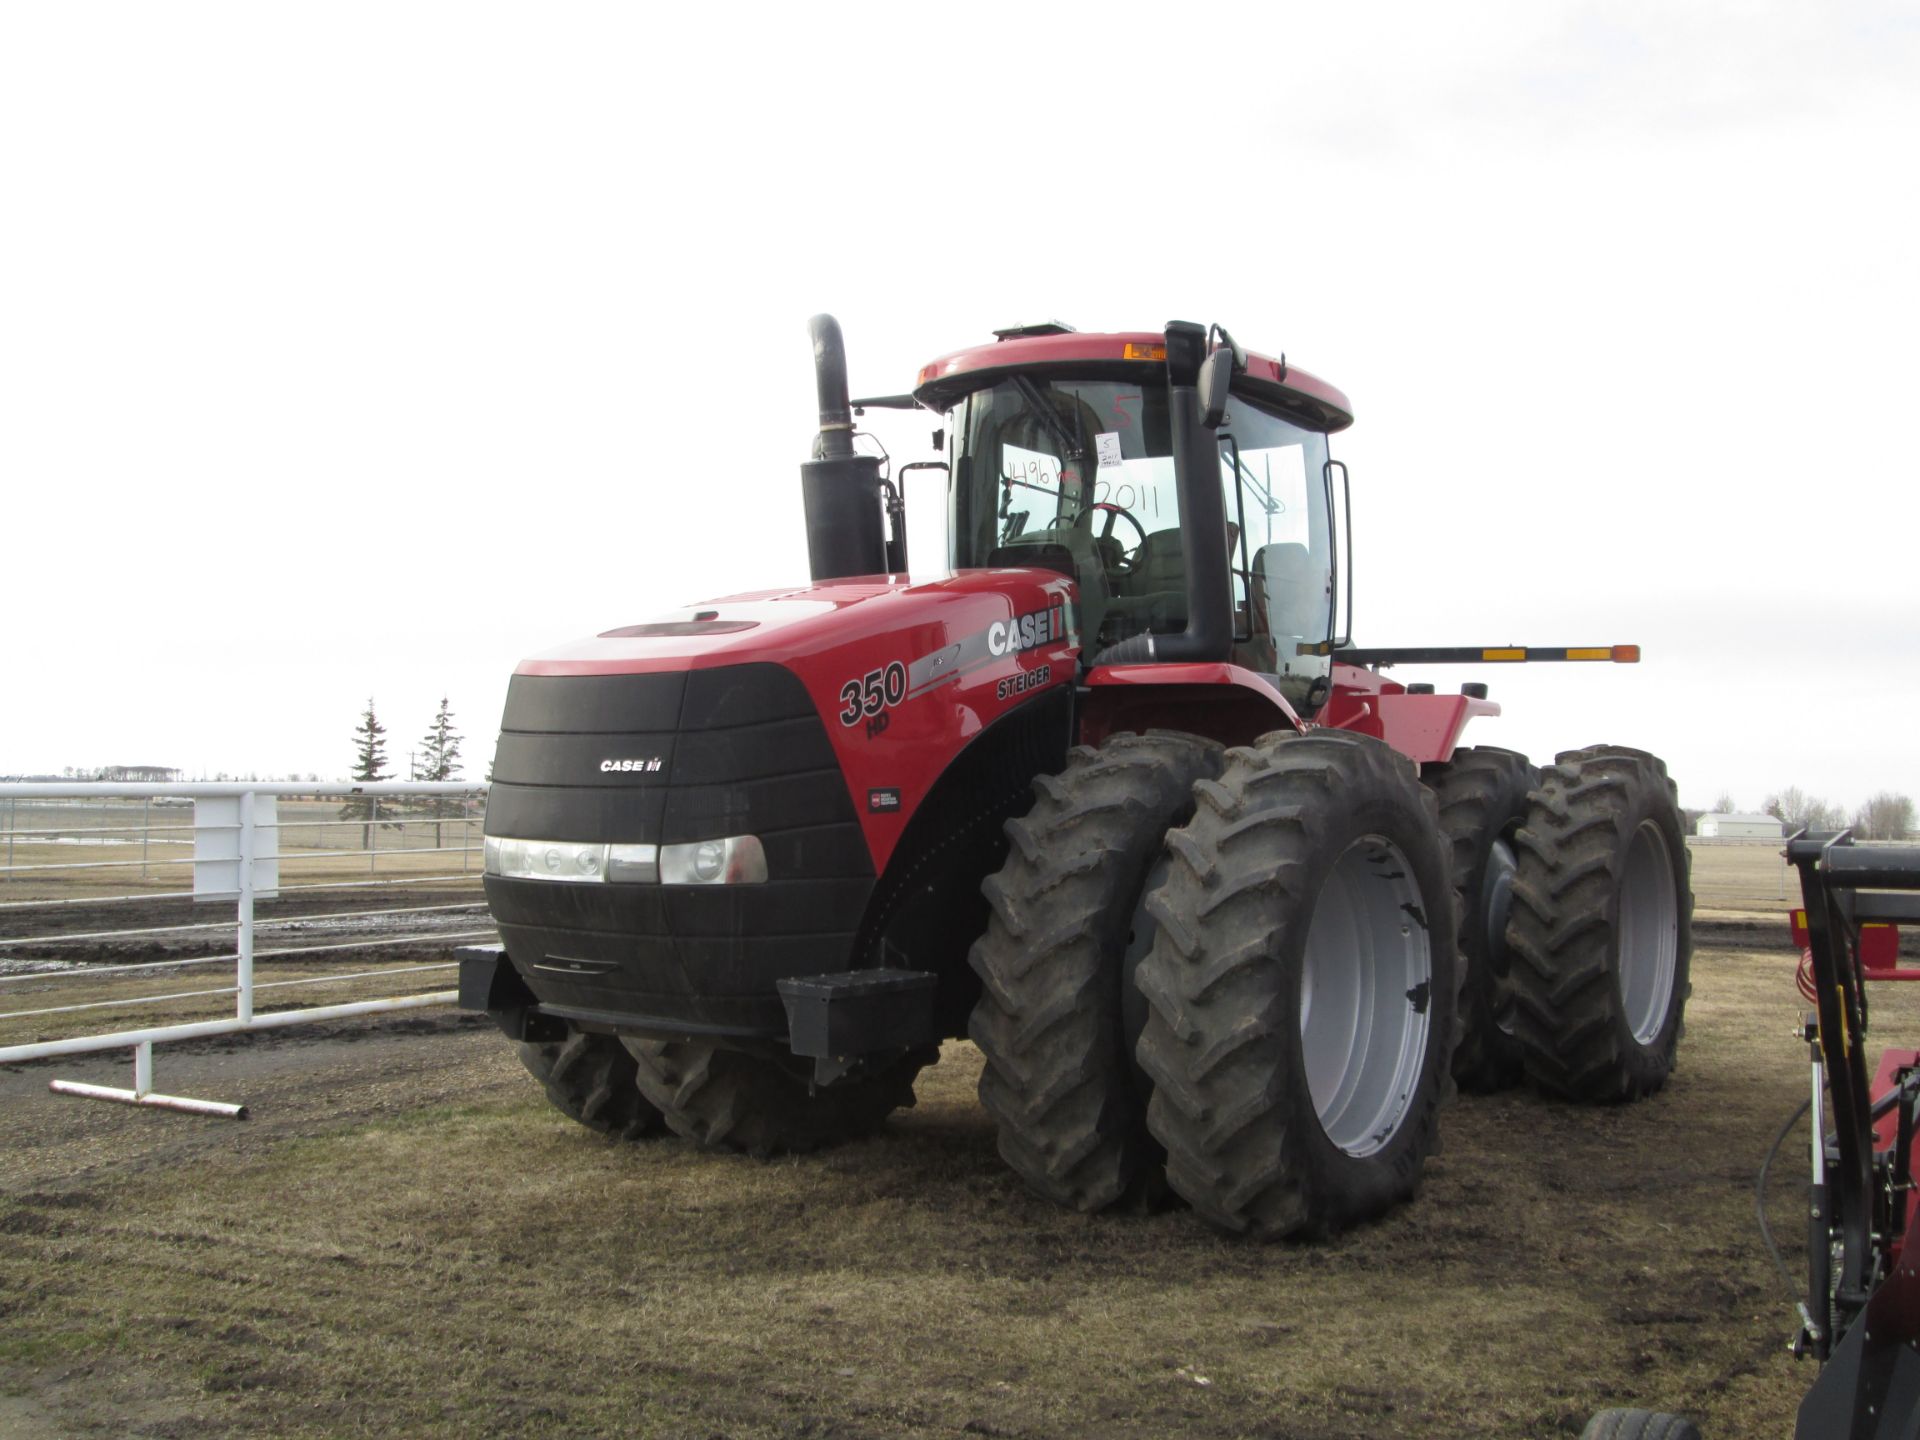 2011 CASE IH Steiger 350 HD 4wd Tractor - Image 6 of 11